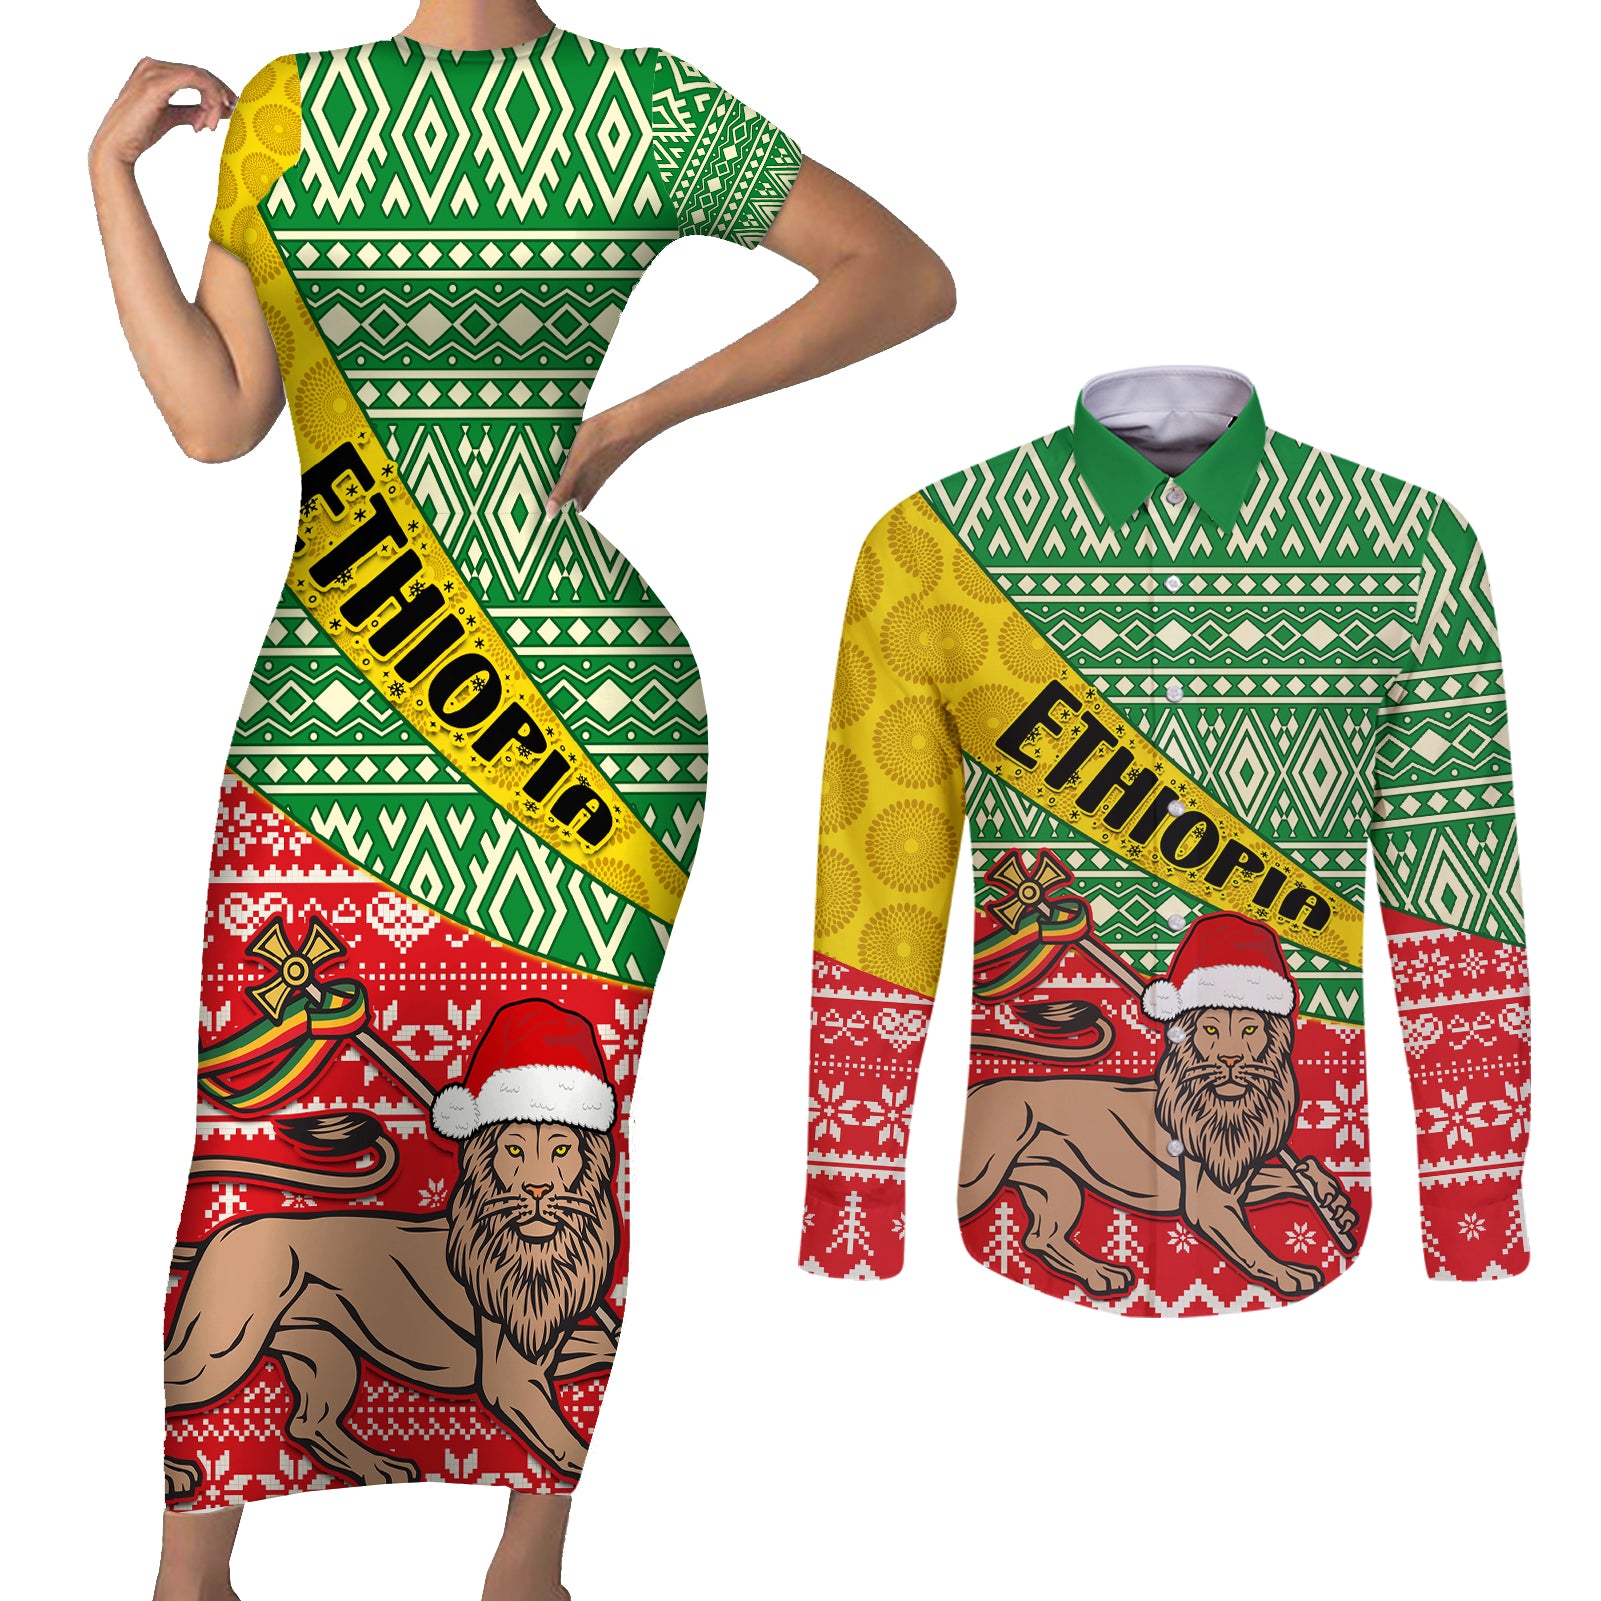 ethiopia-christmas-couples-matching-short-sleeve-bodycon-dress-and-long-sleeve-button-shirt-melkam-gena-african-pattern